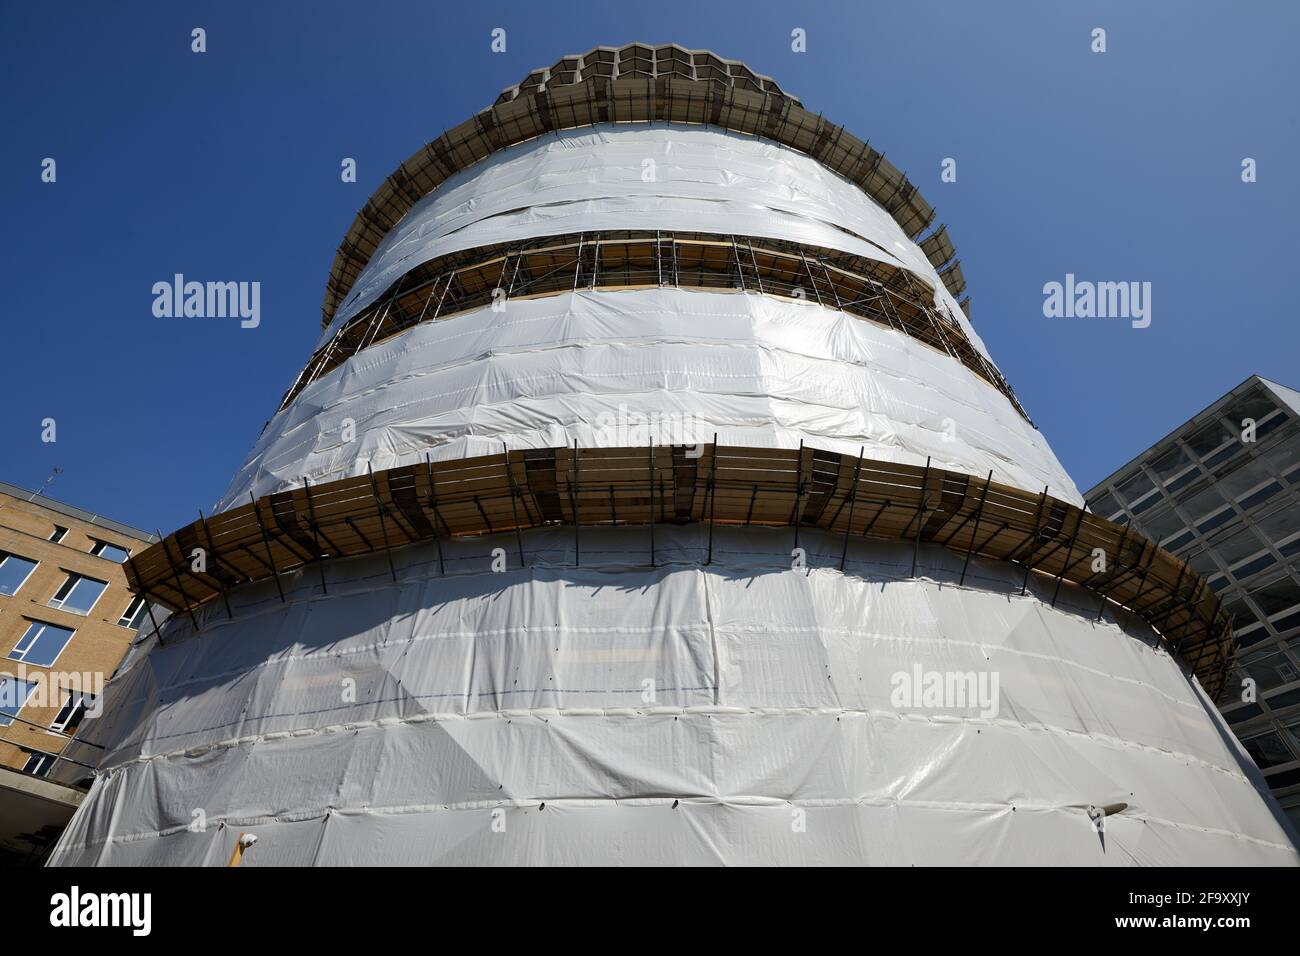 London, UK - 20 Apr 2021:  Space House, a 17-storey cylindrical  office tower in the Holborn area, partially wrapped in protective sheeting. Stock Photo